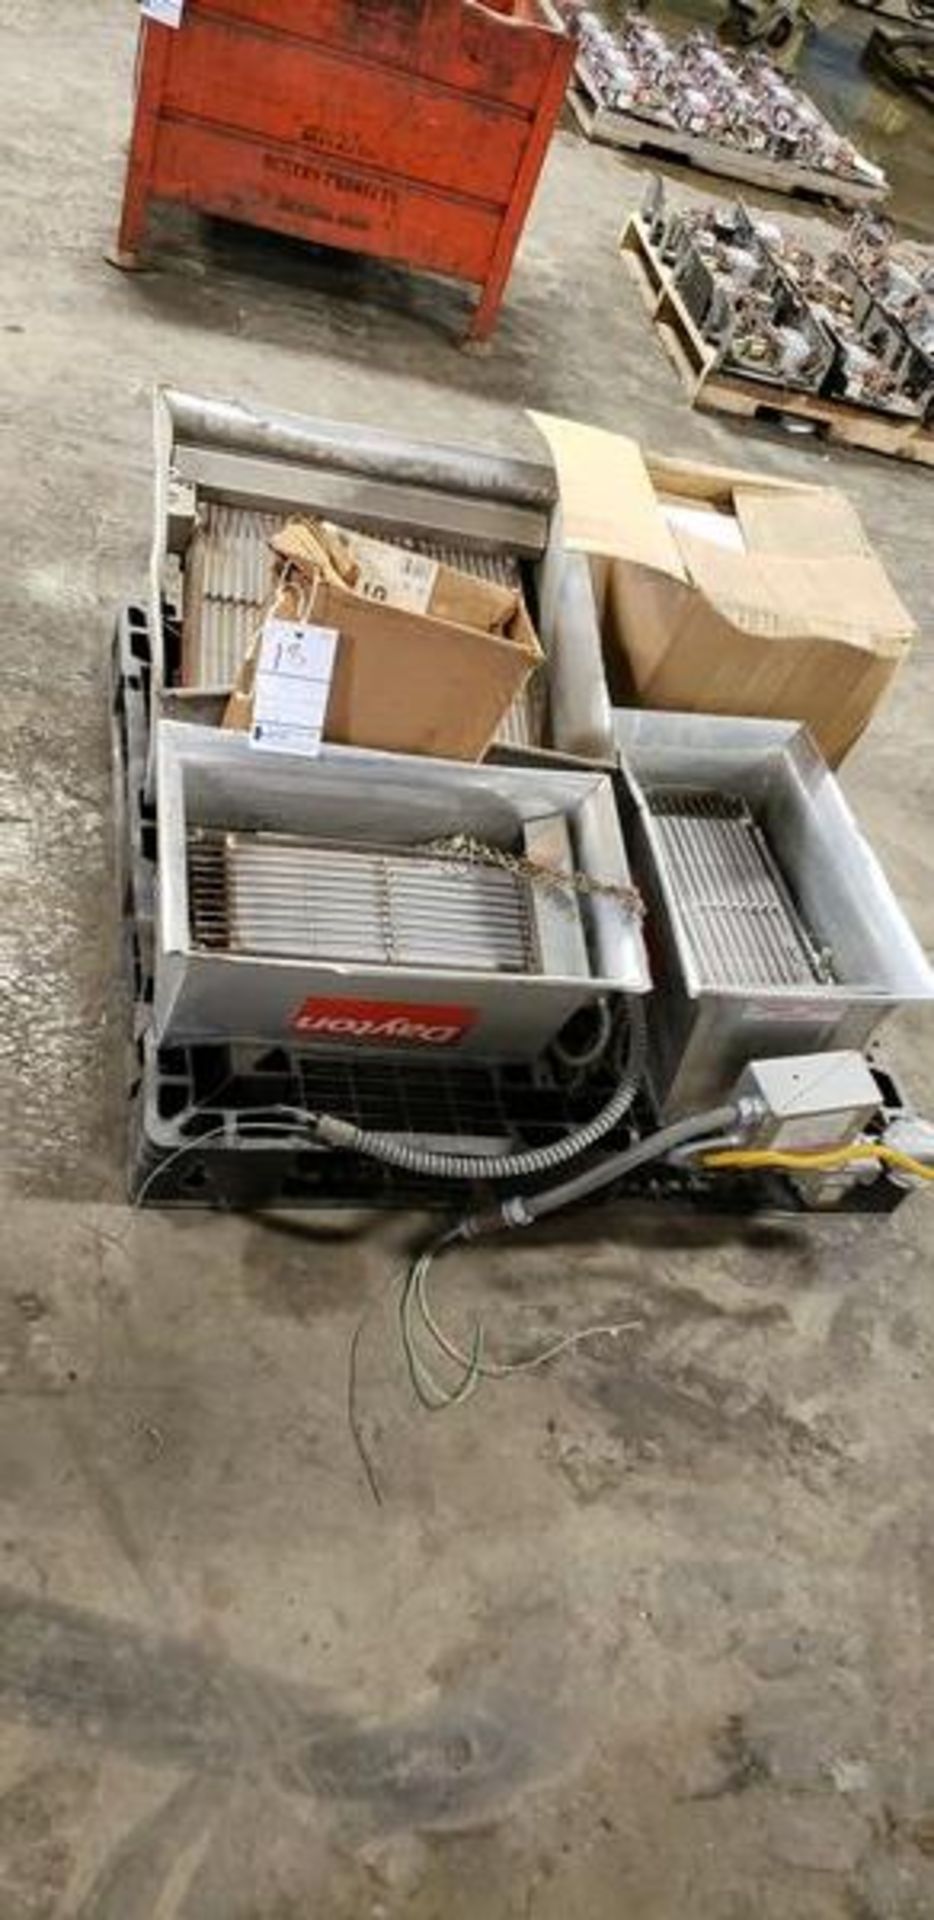 SKID OF OVERHEAD HEATERS AND PARTS